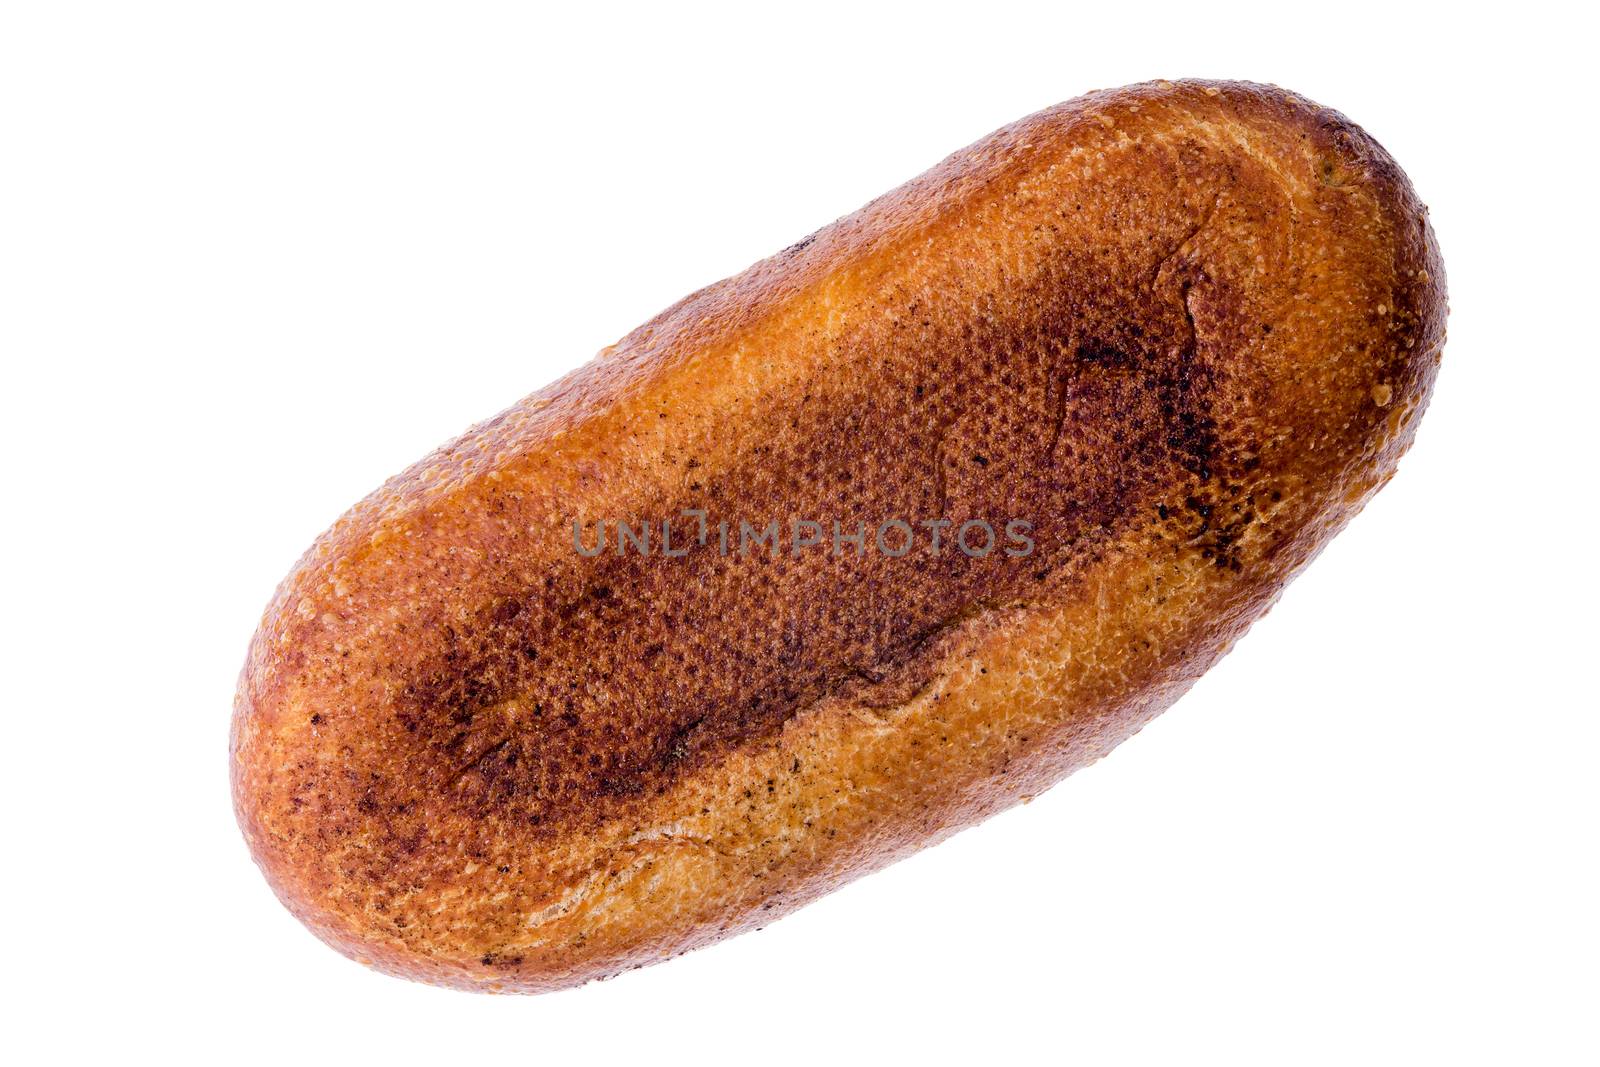 Underside of a rounded loaf of freshly baked sourdough bread arranged diagonally on a white background viewed form above